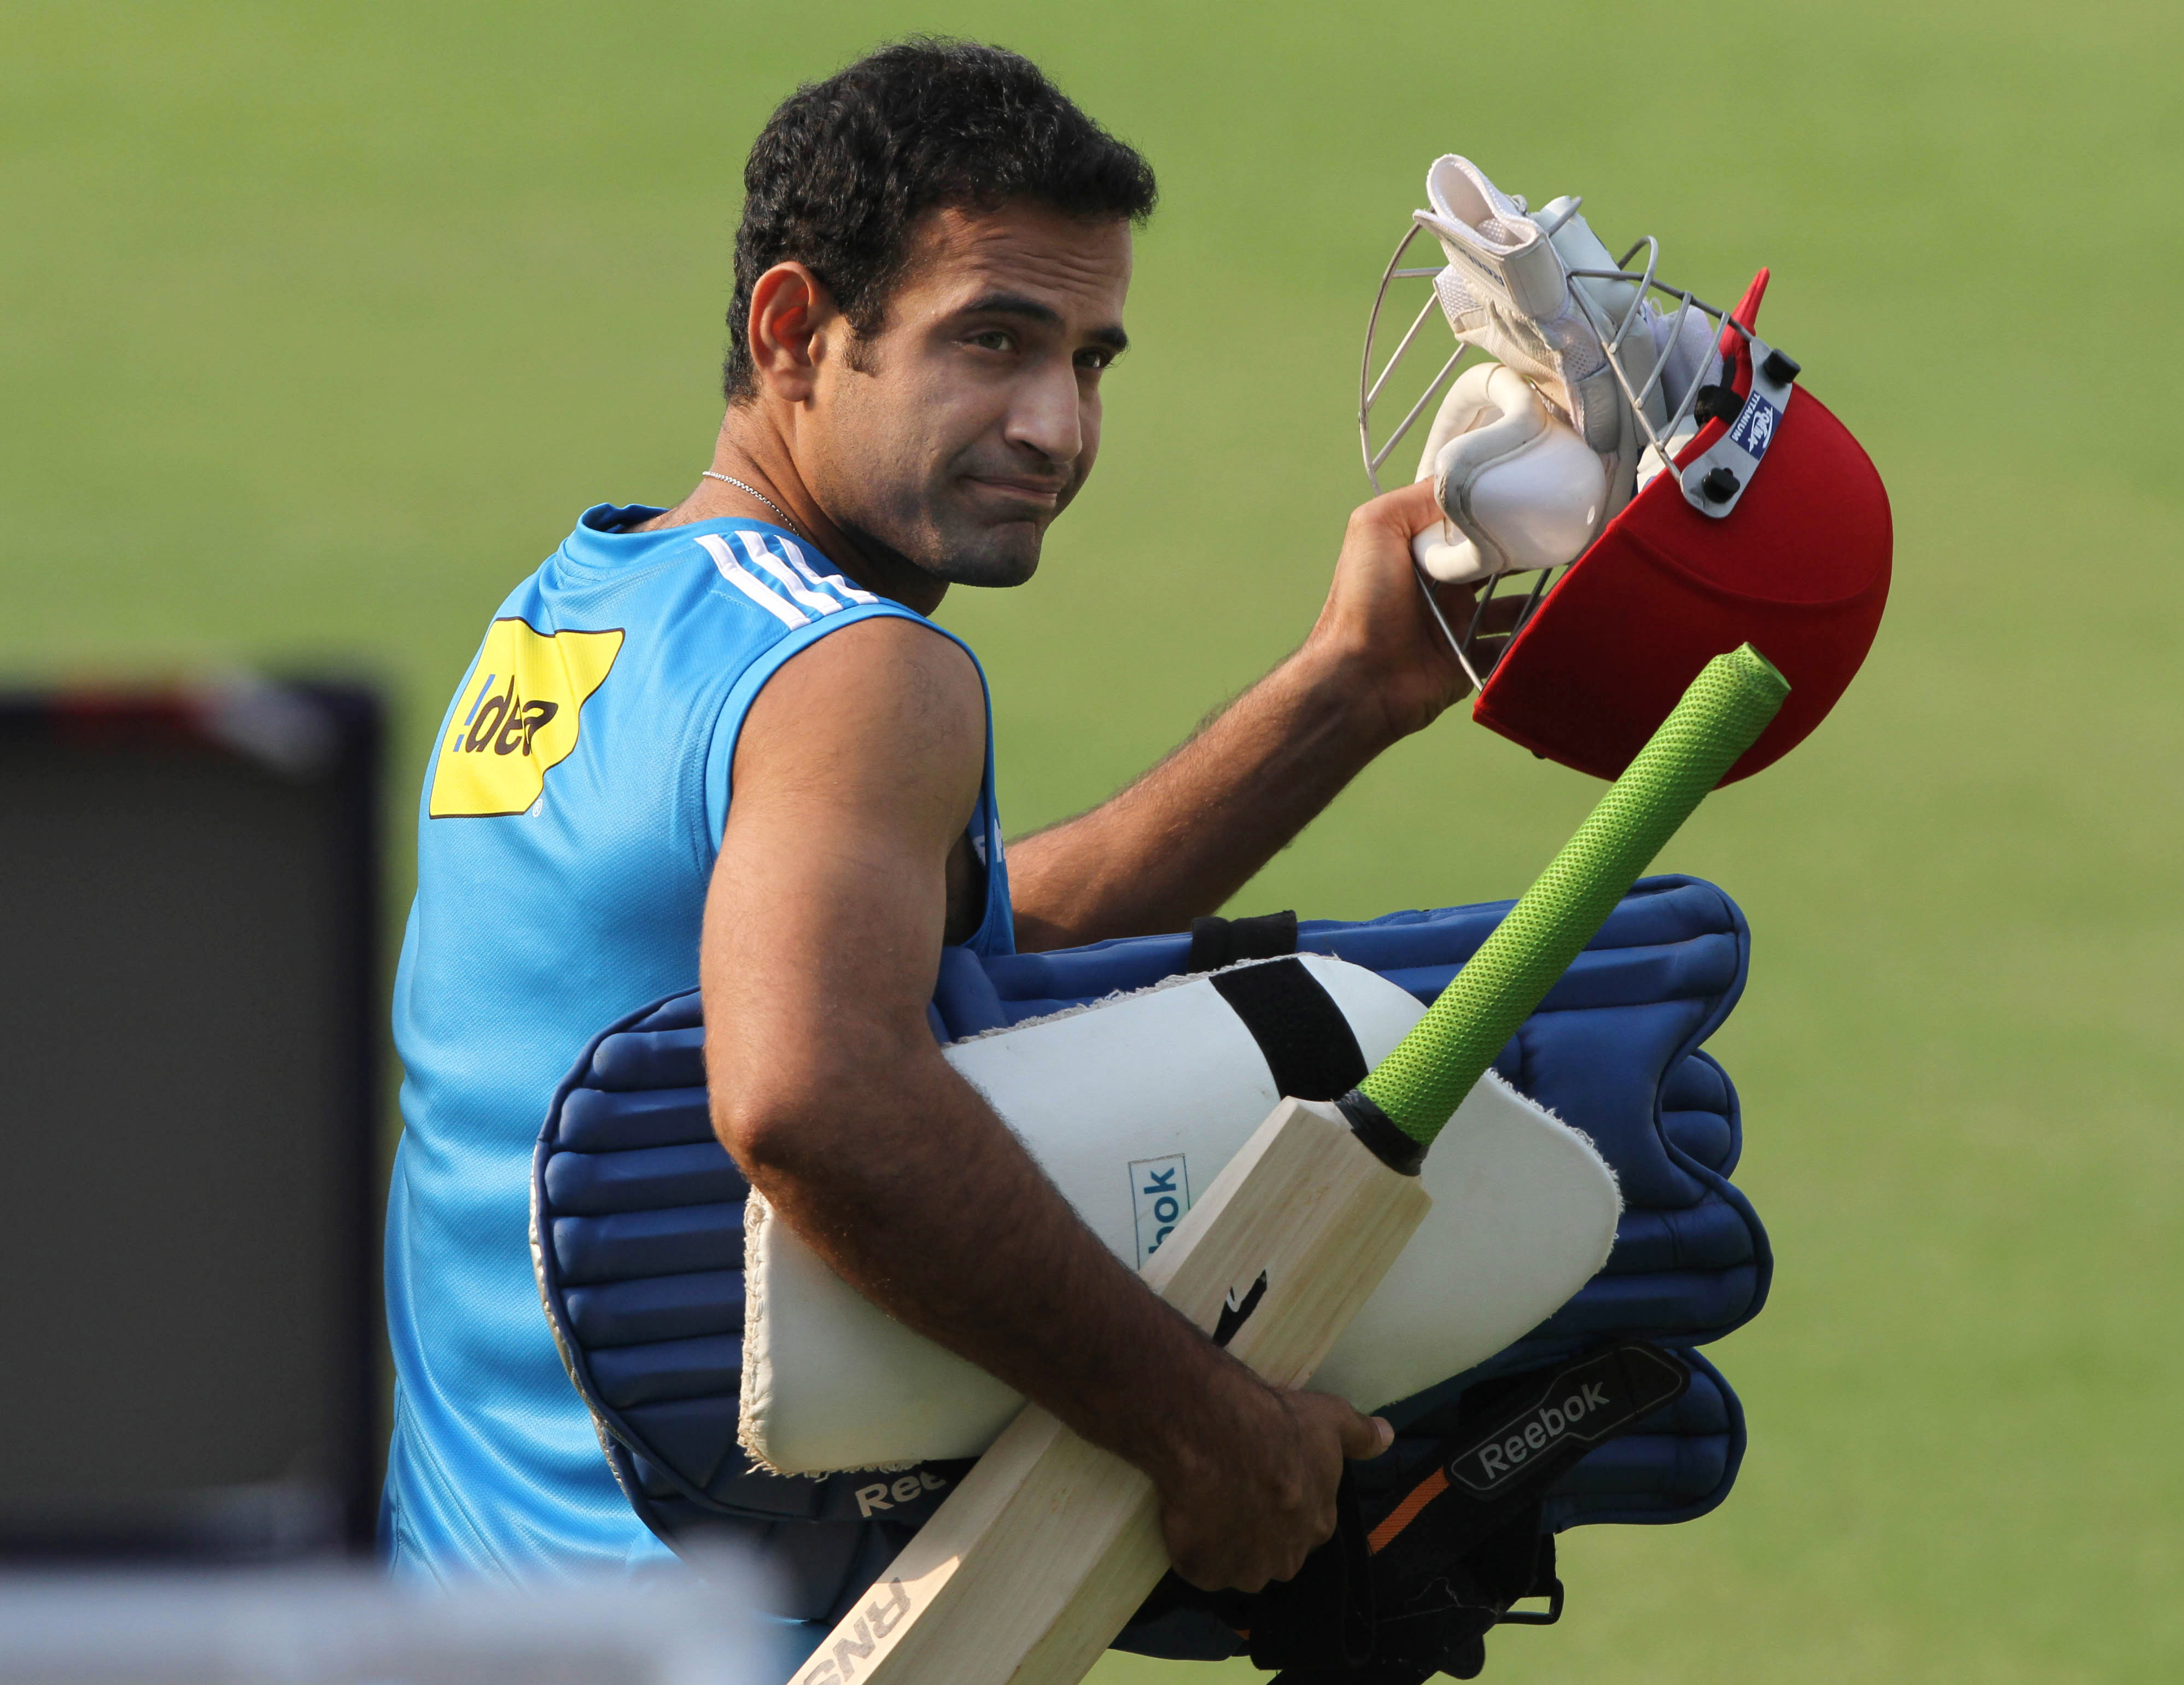 Everyone was so happy to see me getting early wickets again - Irfan Pathan recalls his hat-trick